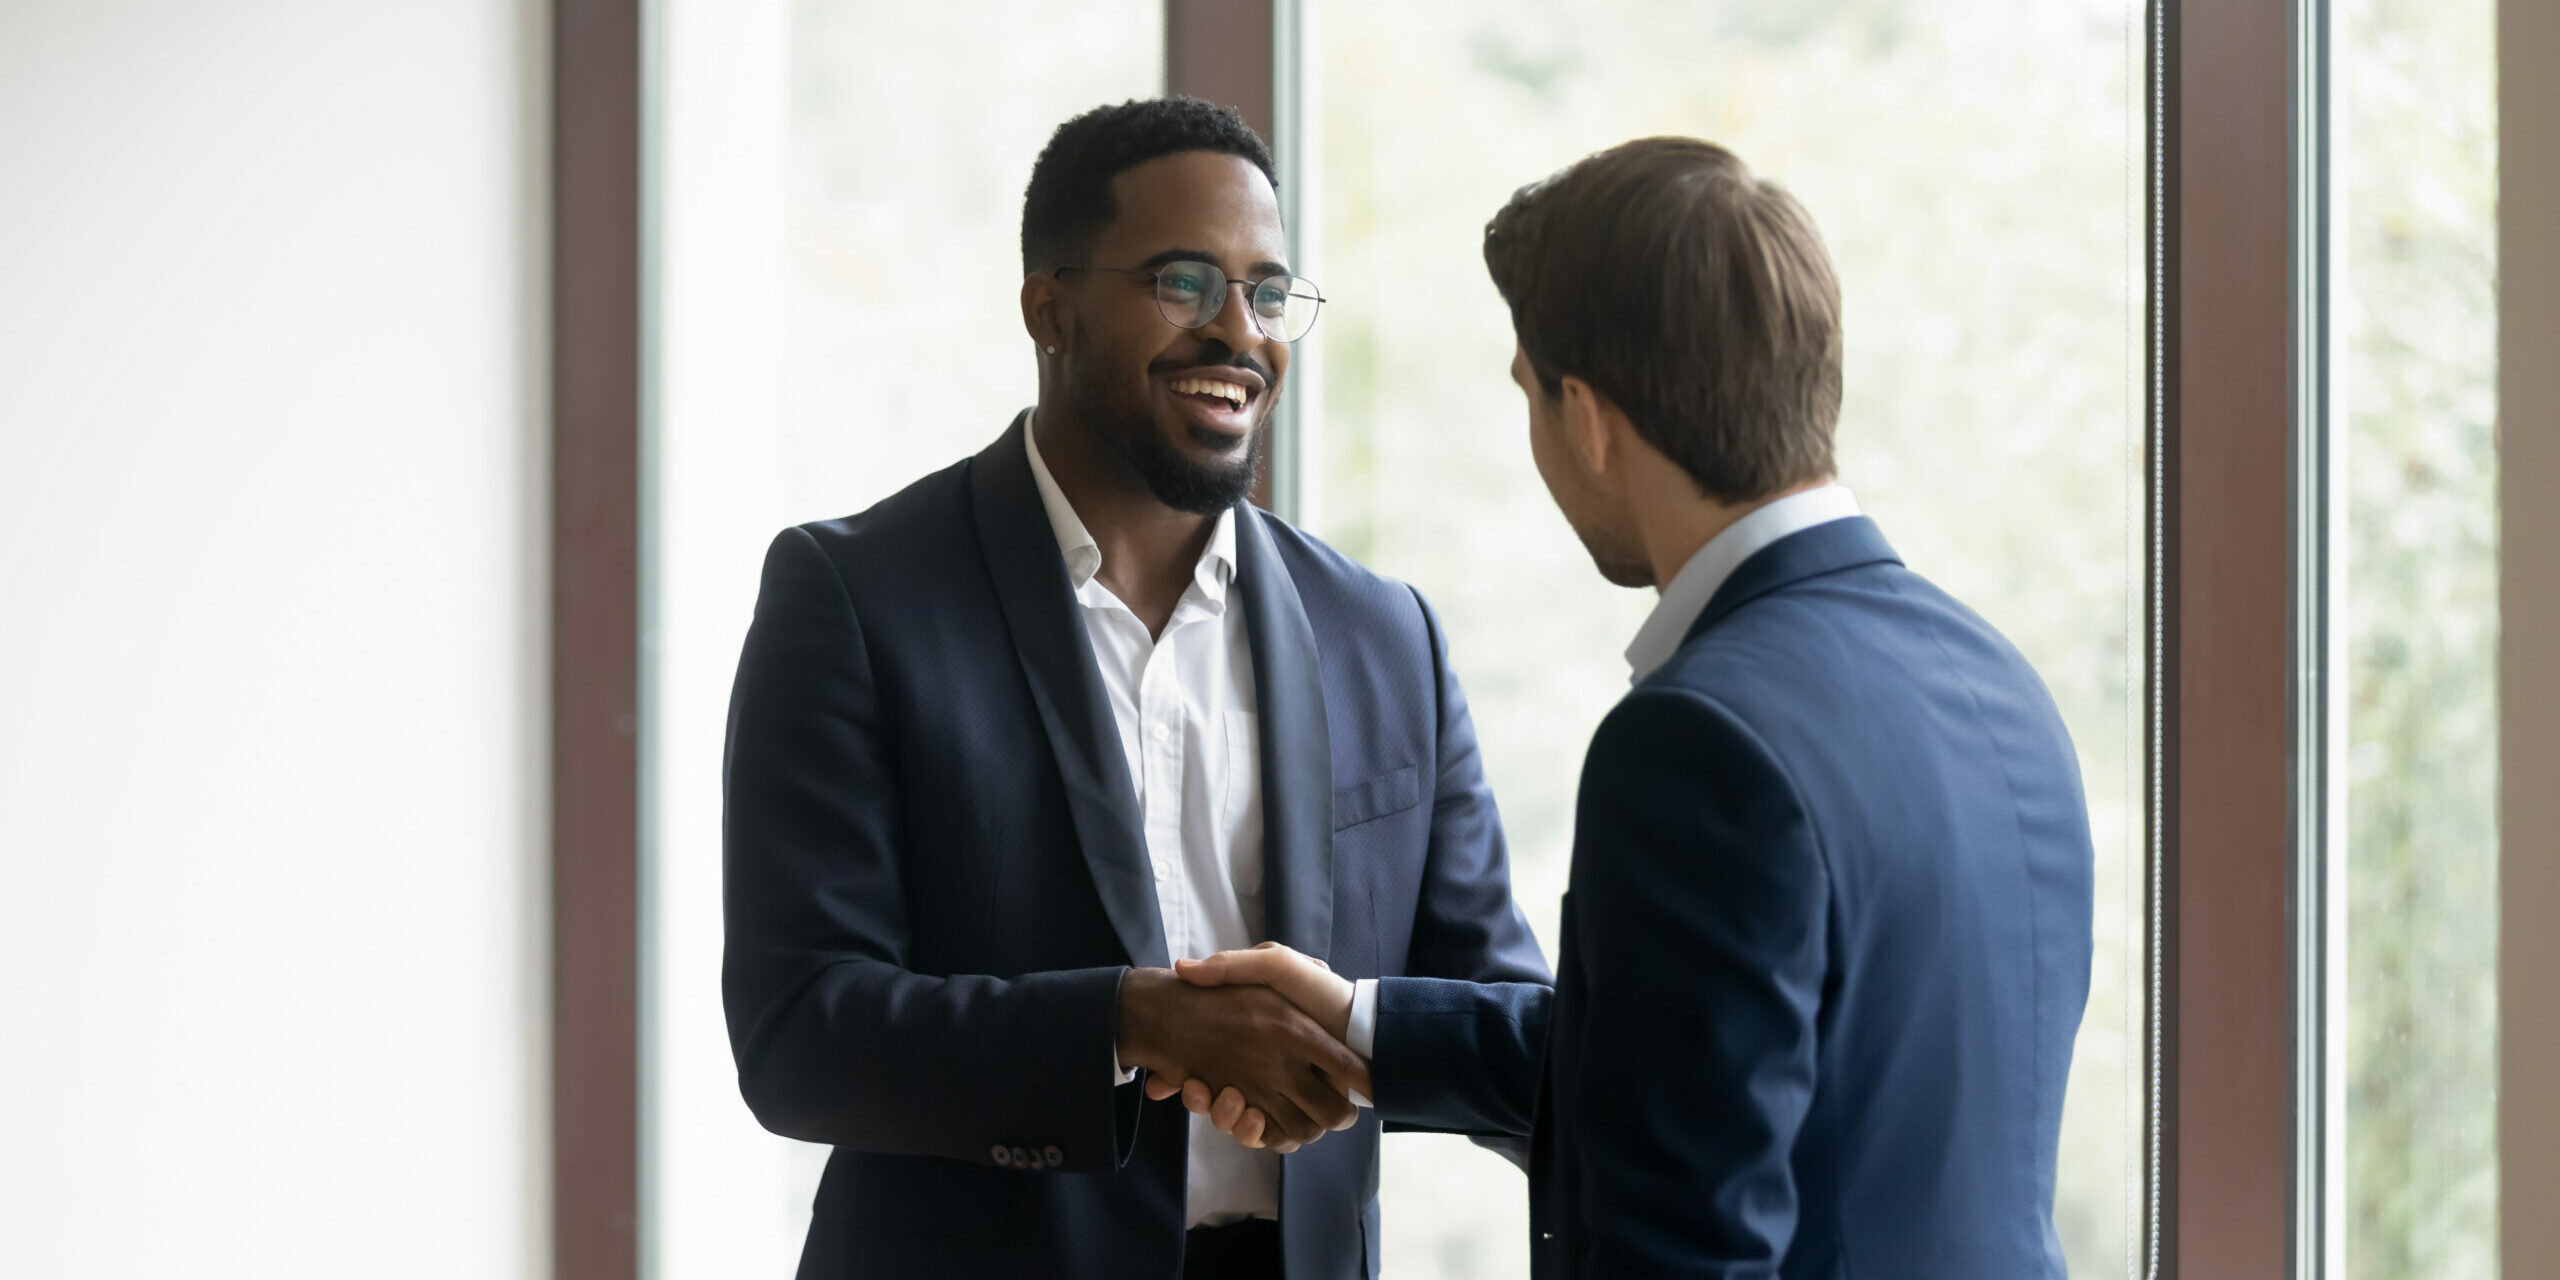 Overjoyed multiethnic businessmen shake hands greeting getting acquainted in office, smiling diverse multiracial male business partners handshake close deal make agreement after successful negotiation